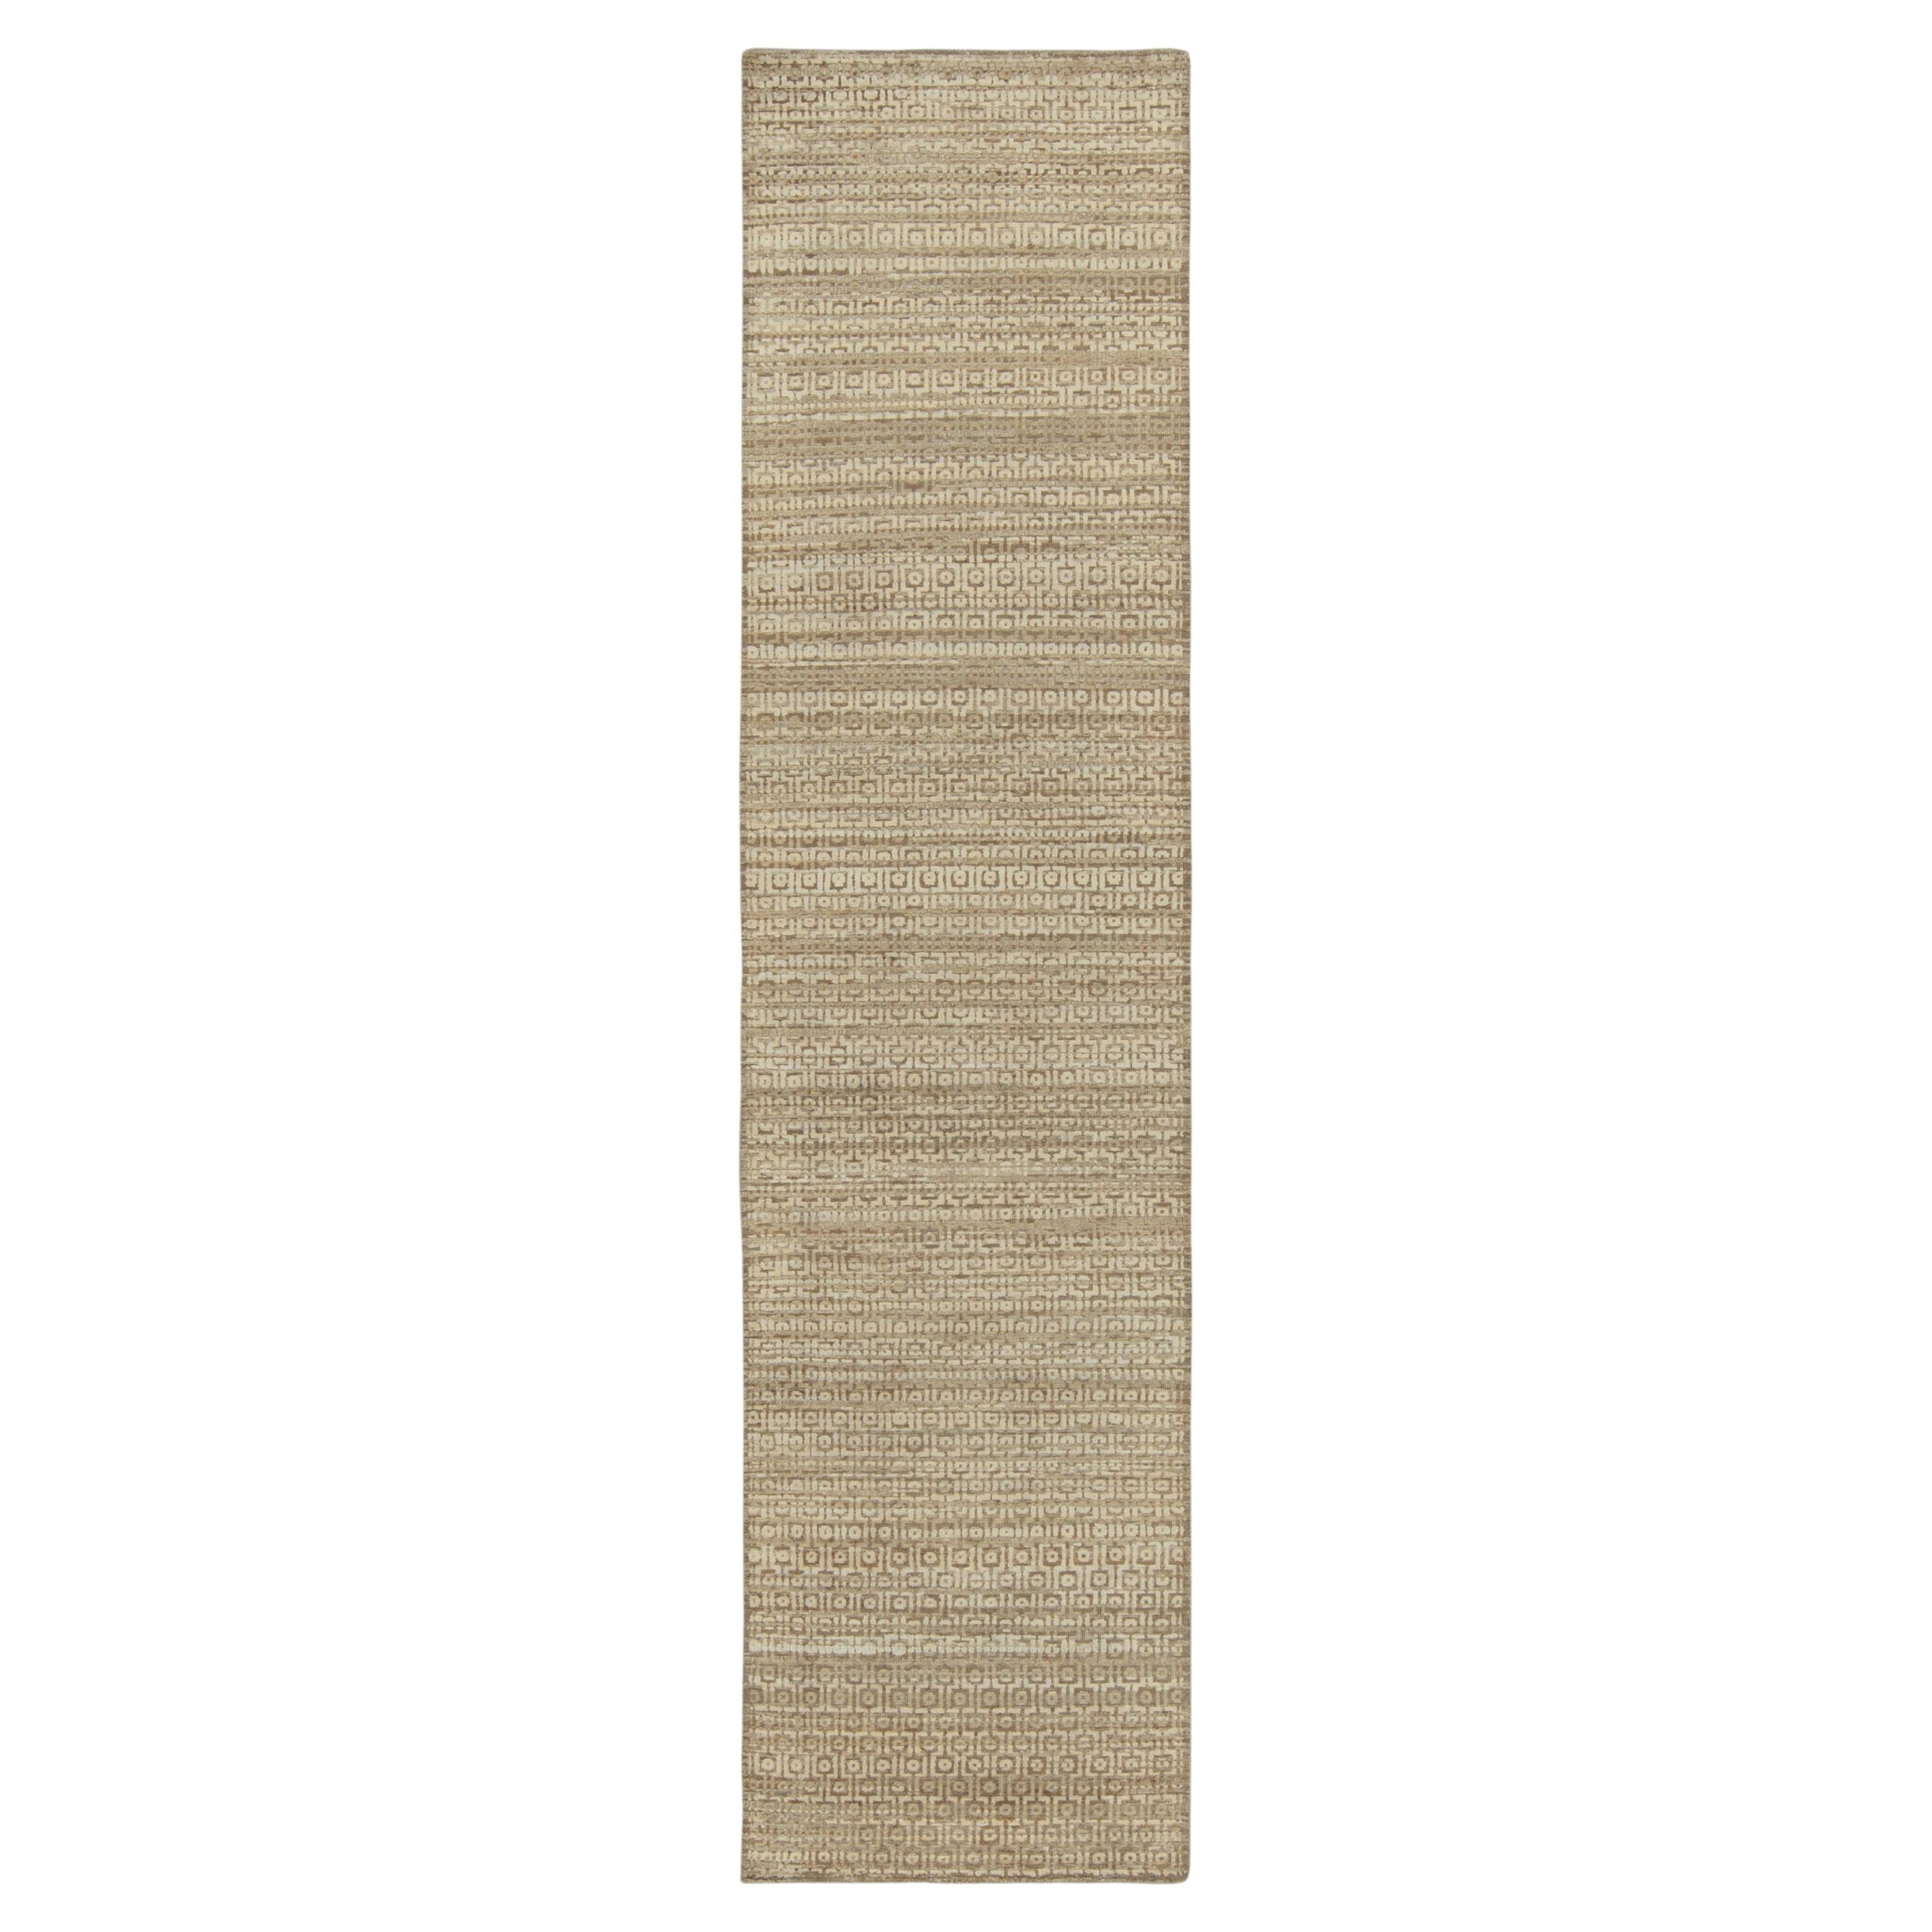 Rug & Kilim’s Modern Textural Runner in Beige-Brown and White Geometric Patterns For Sale